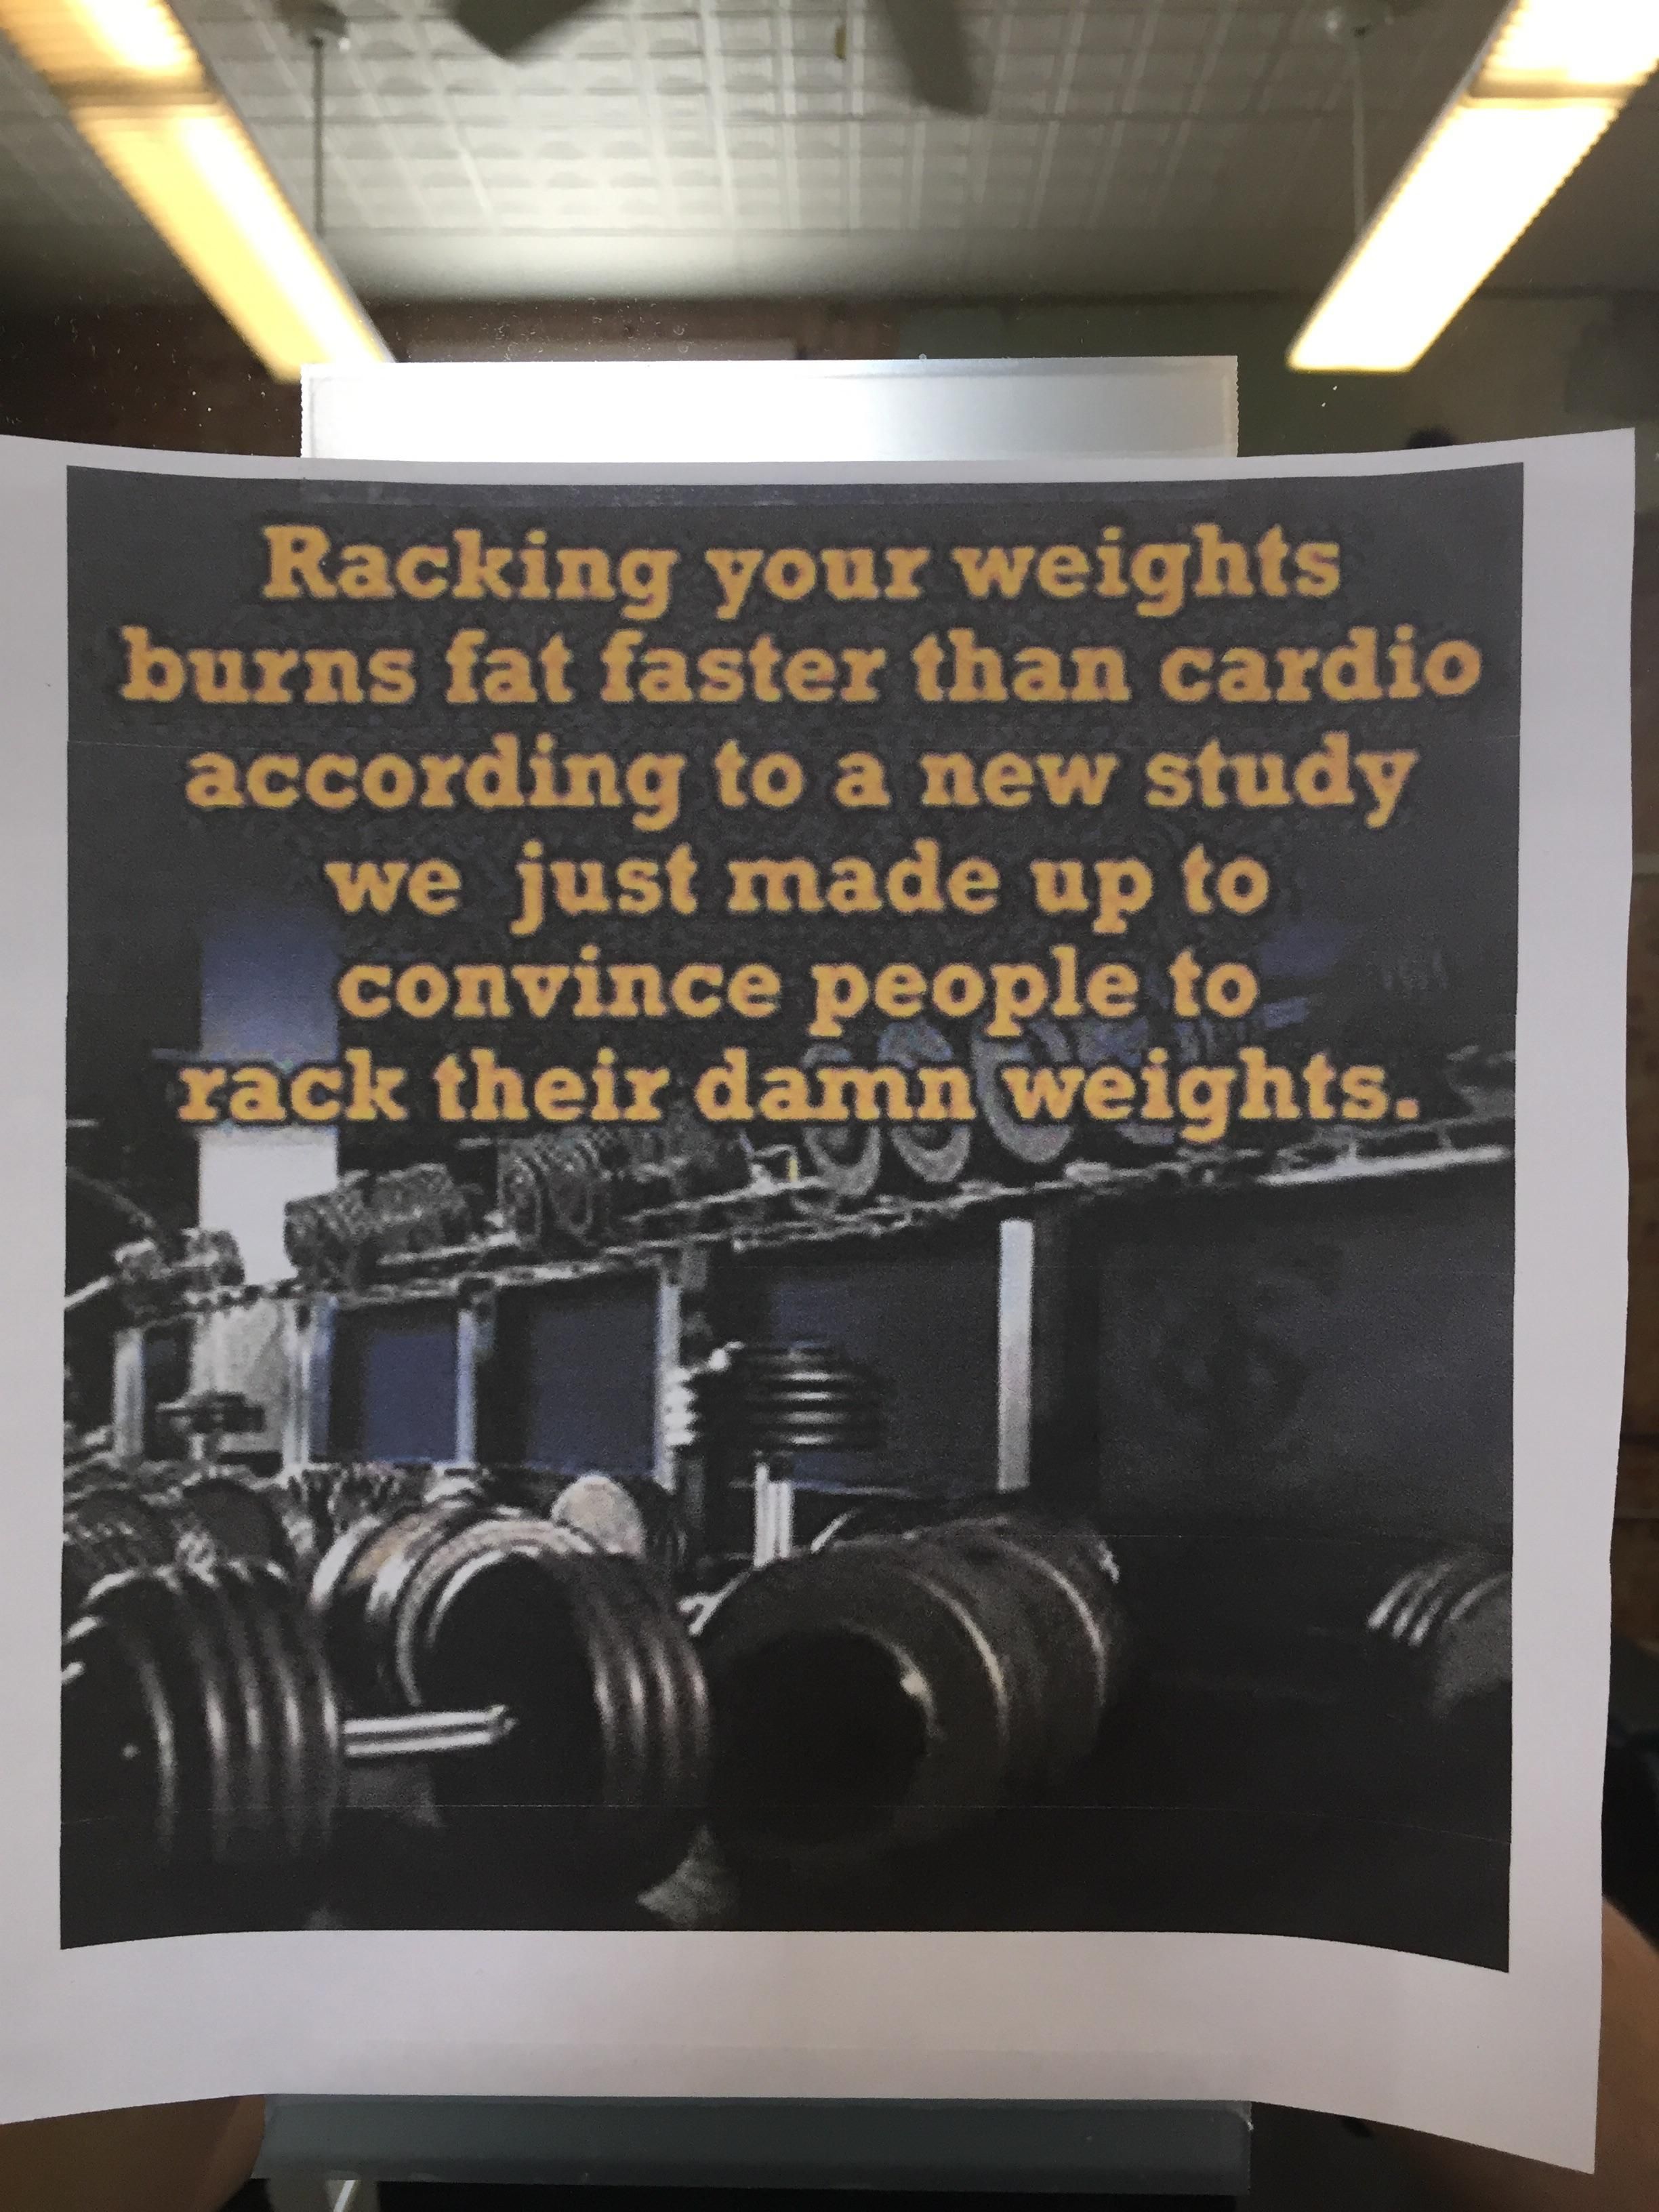 At my local gym